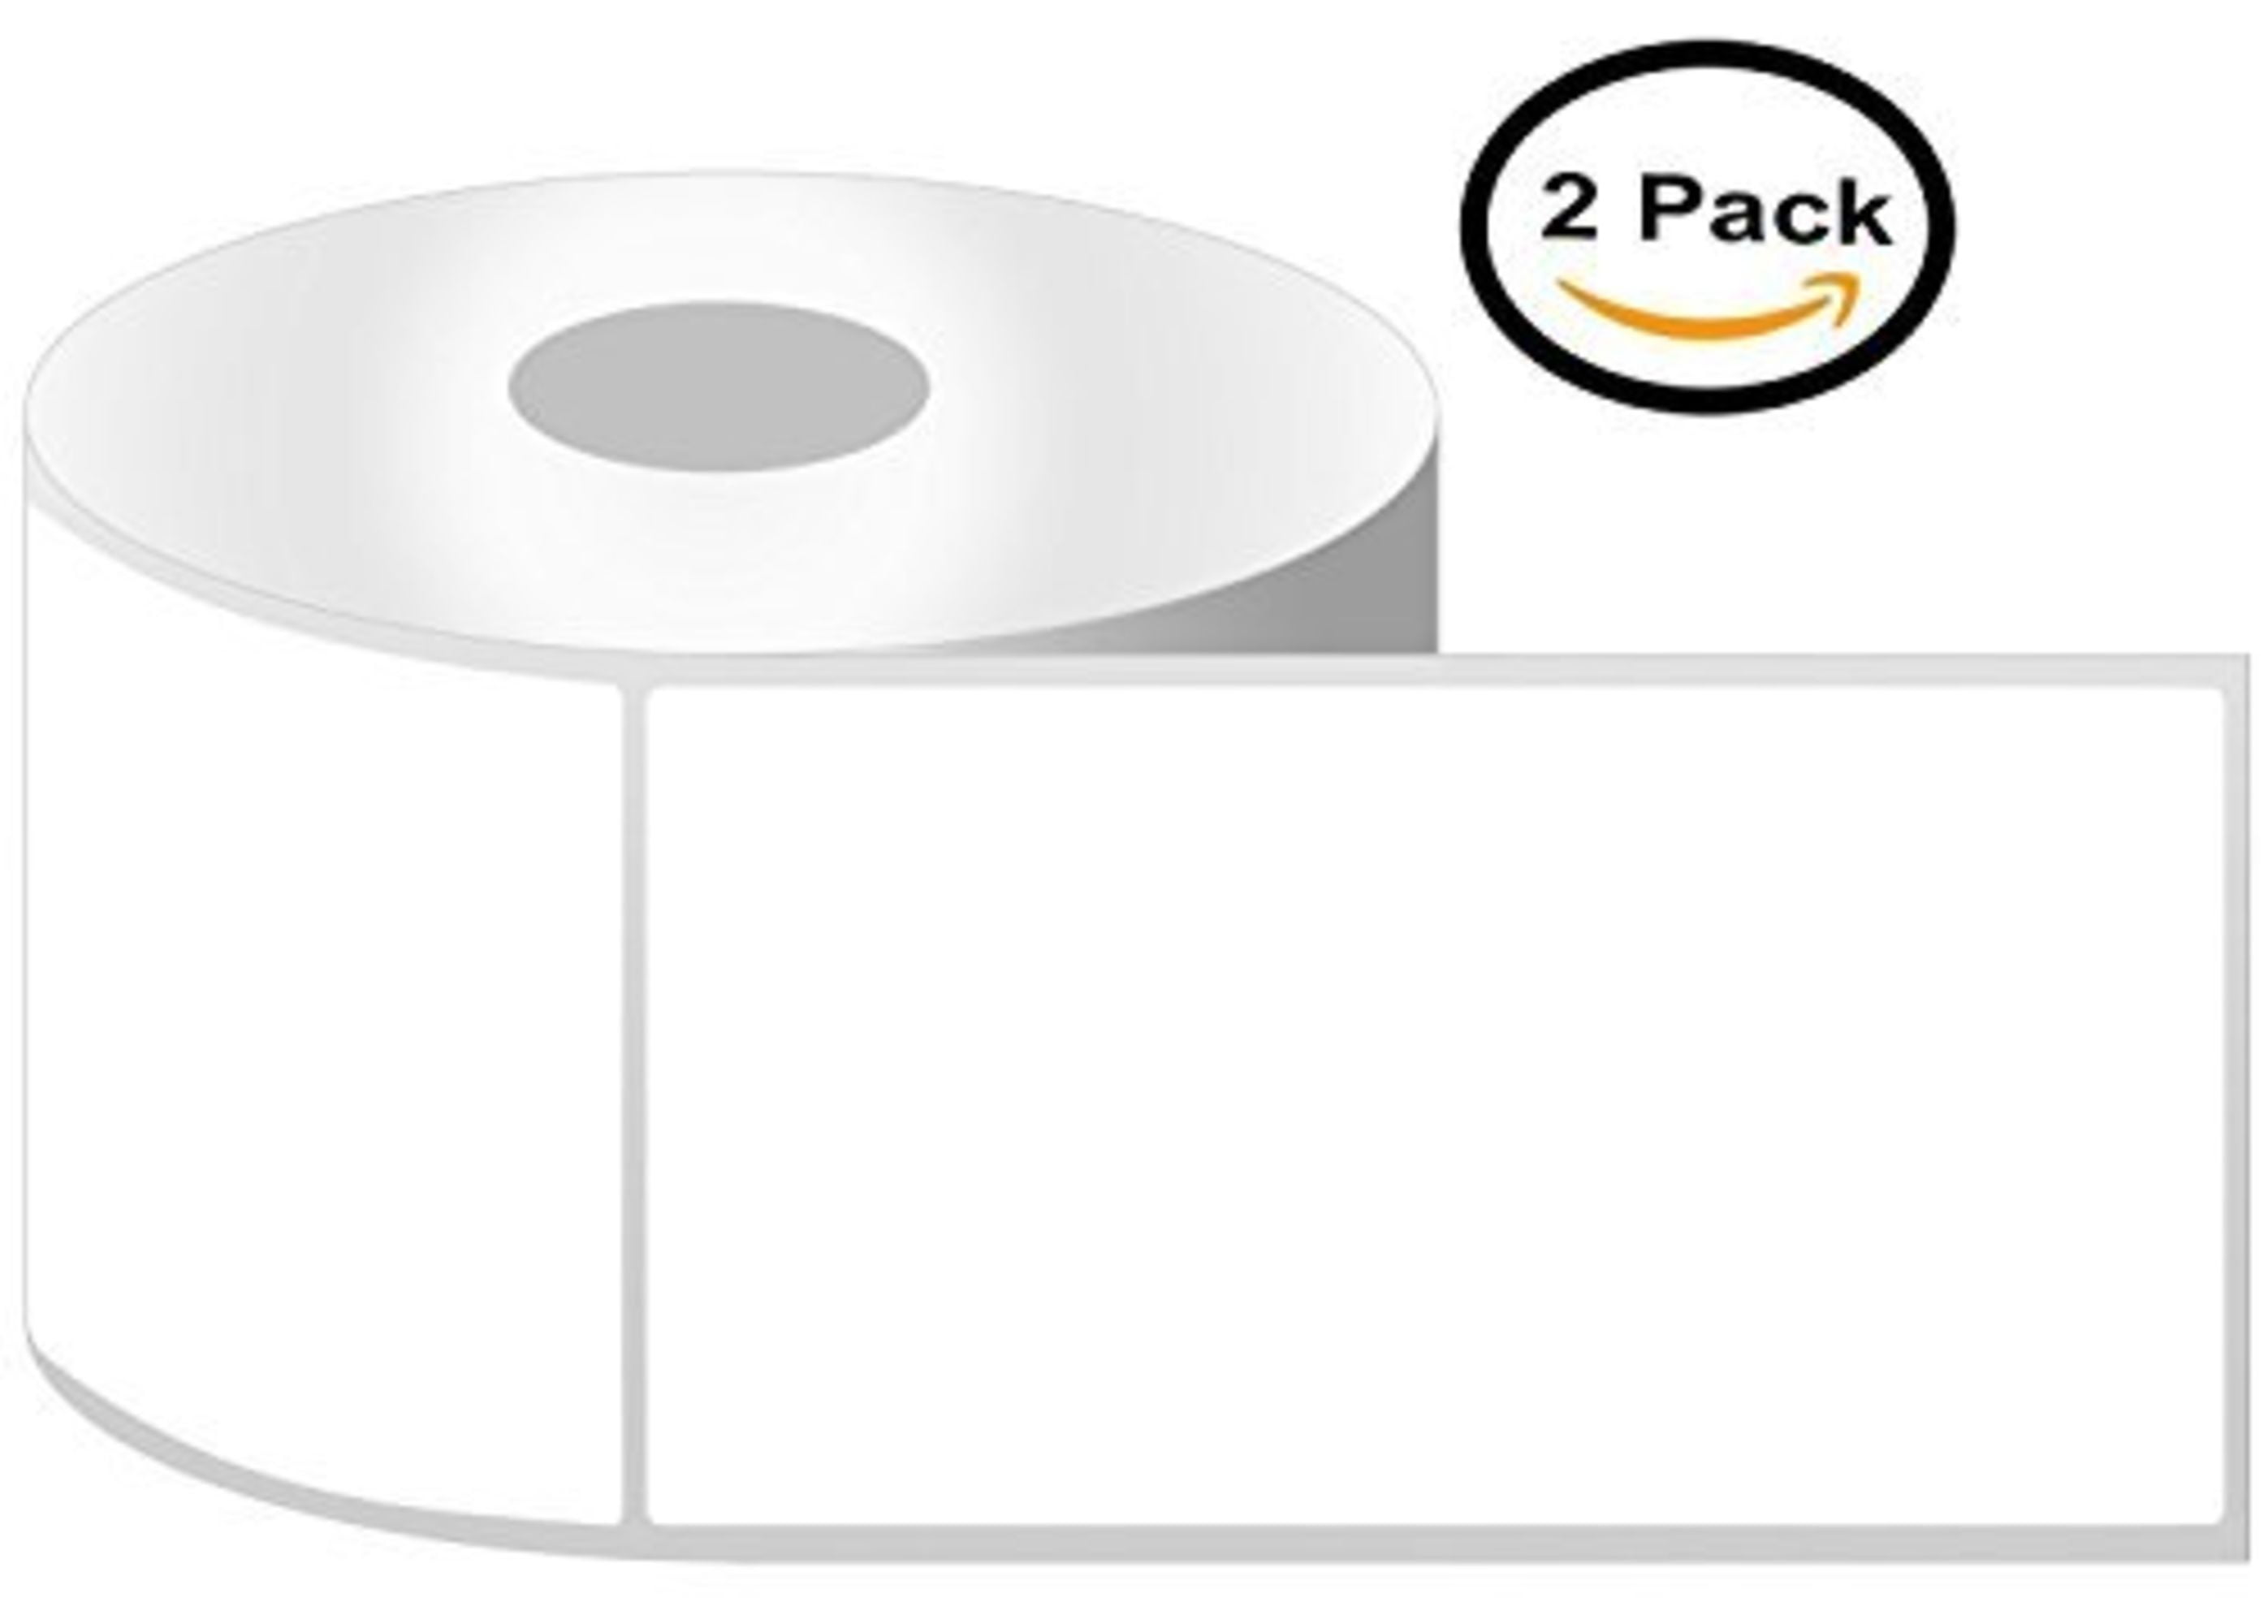 Direct Thermal Shipping Paper Roll Labels Fits Zebra 2844 Eltron